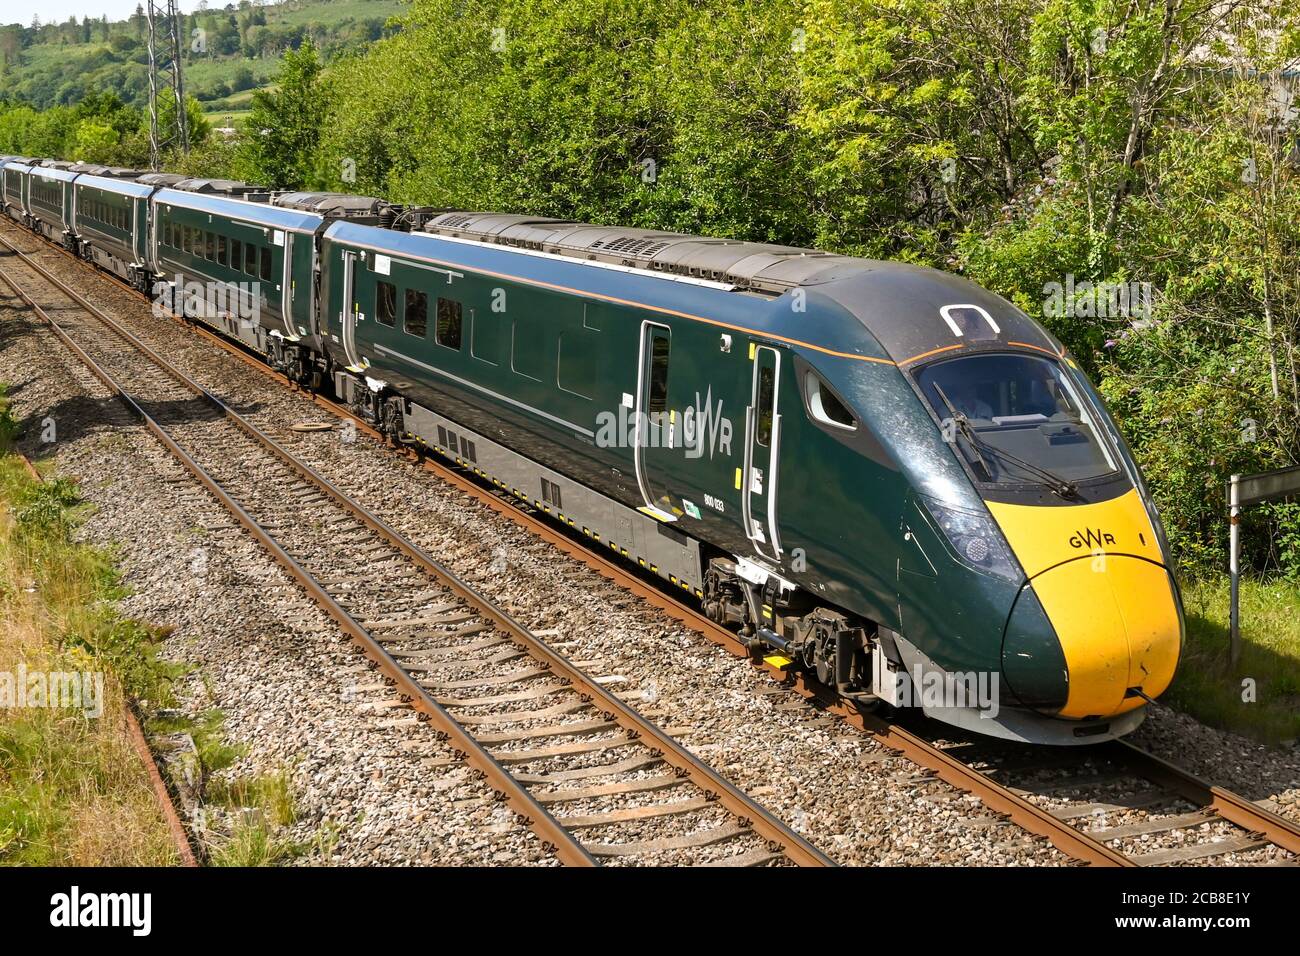 Pontyclun, Wales - August 2020: New electro diesel high speed train operated by Great Western Railway. The train is manufactured by Hitachi. Stock Photo